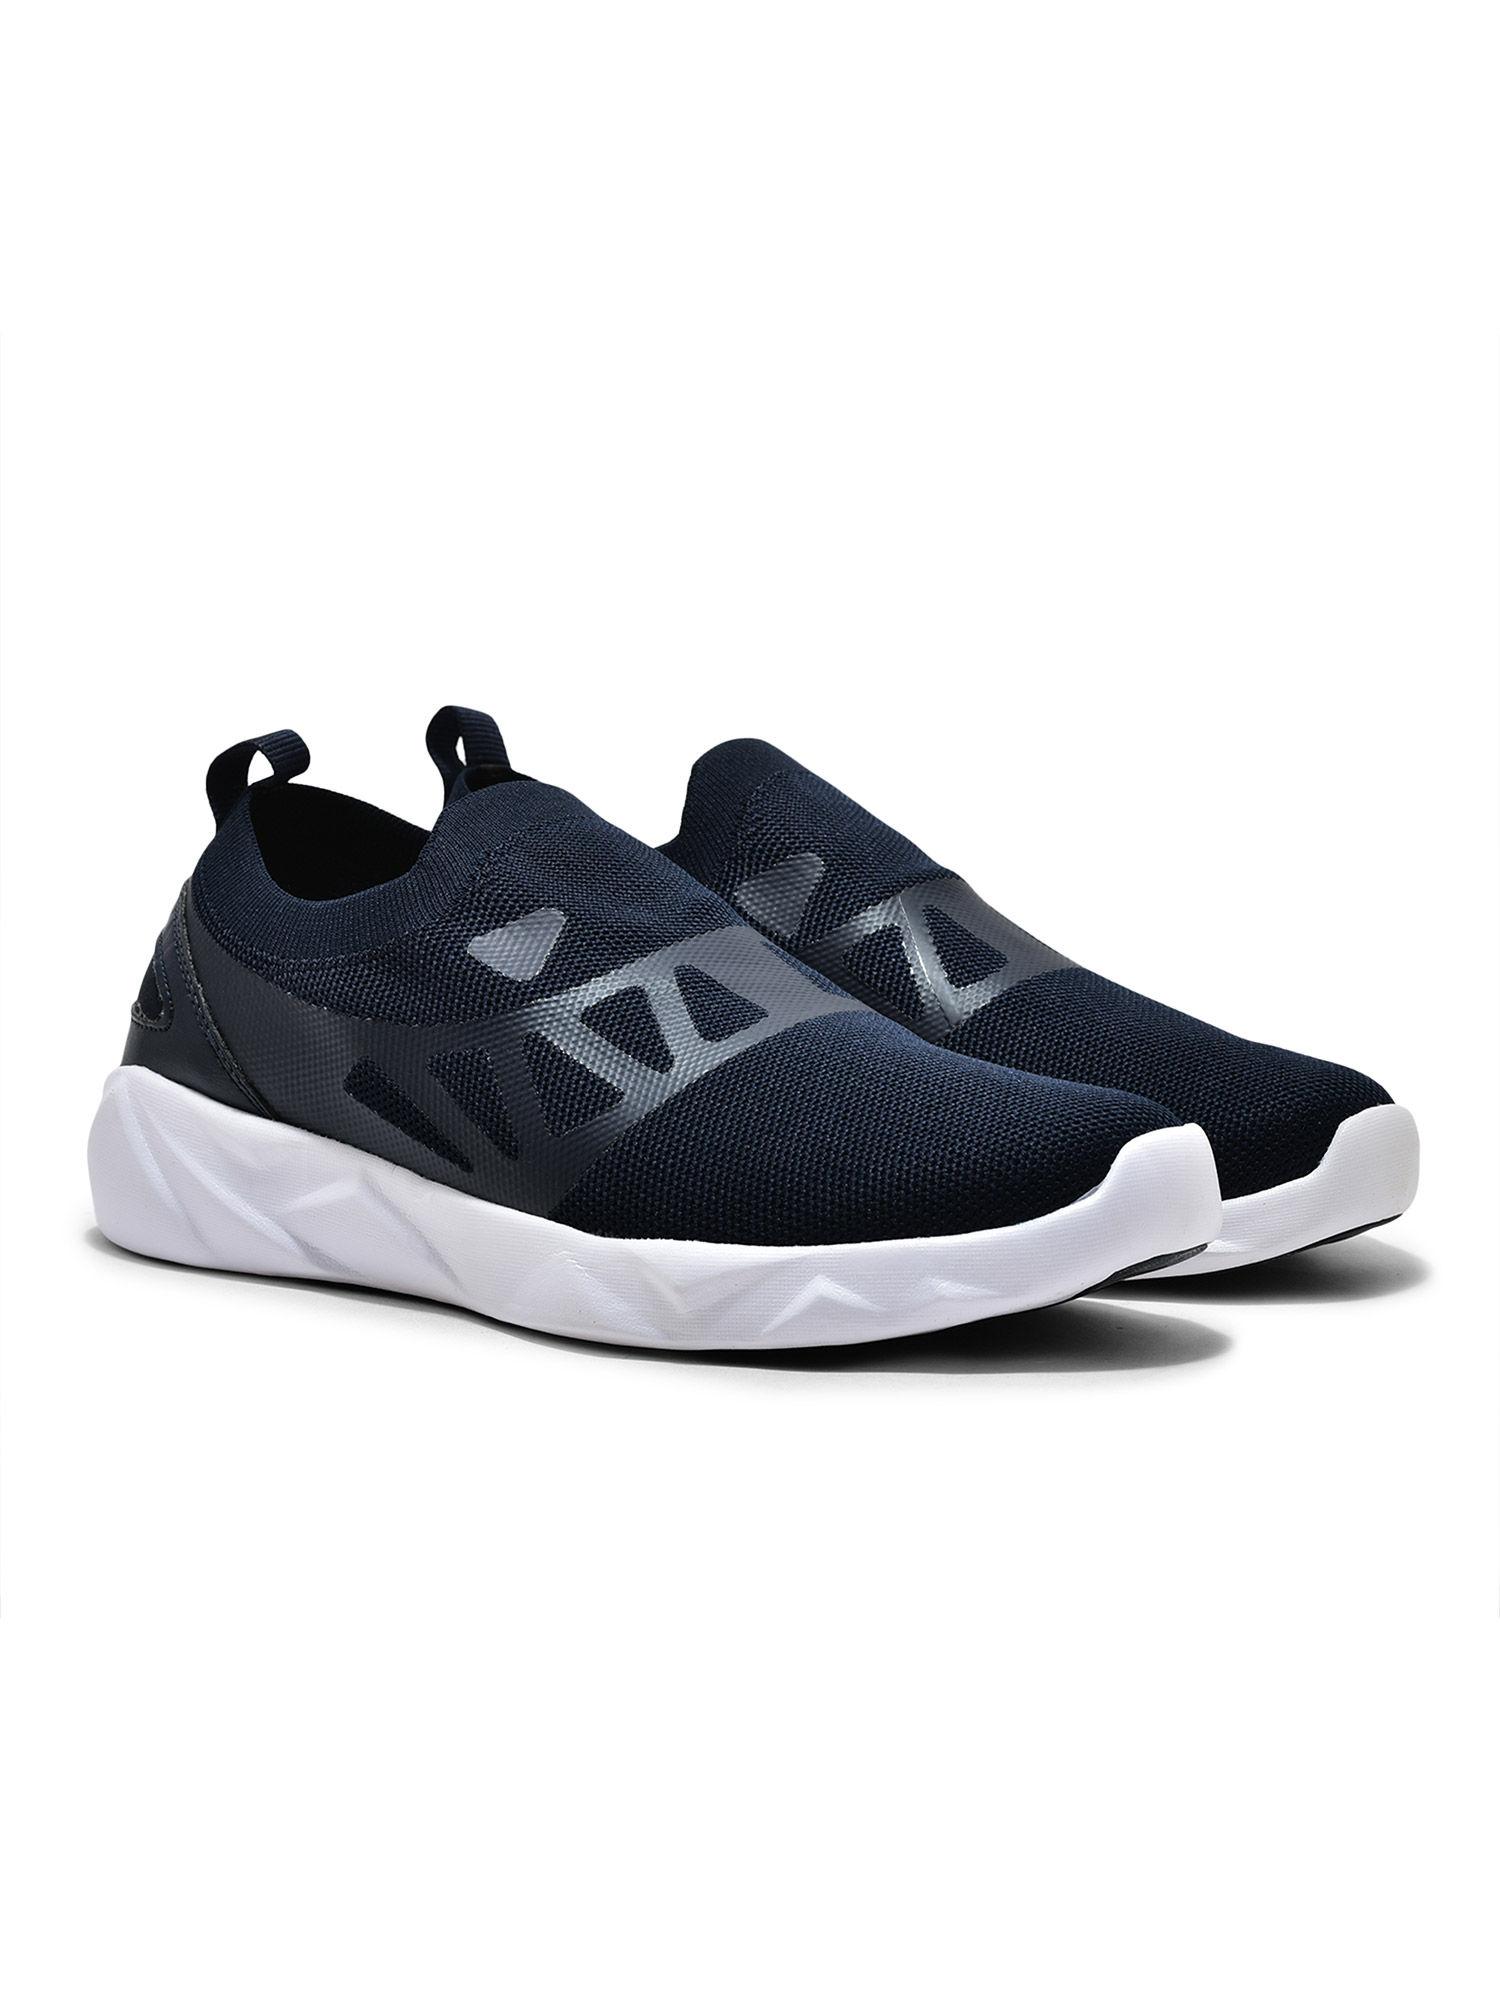 mens navy blue sports shoes